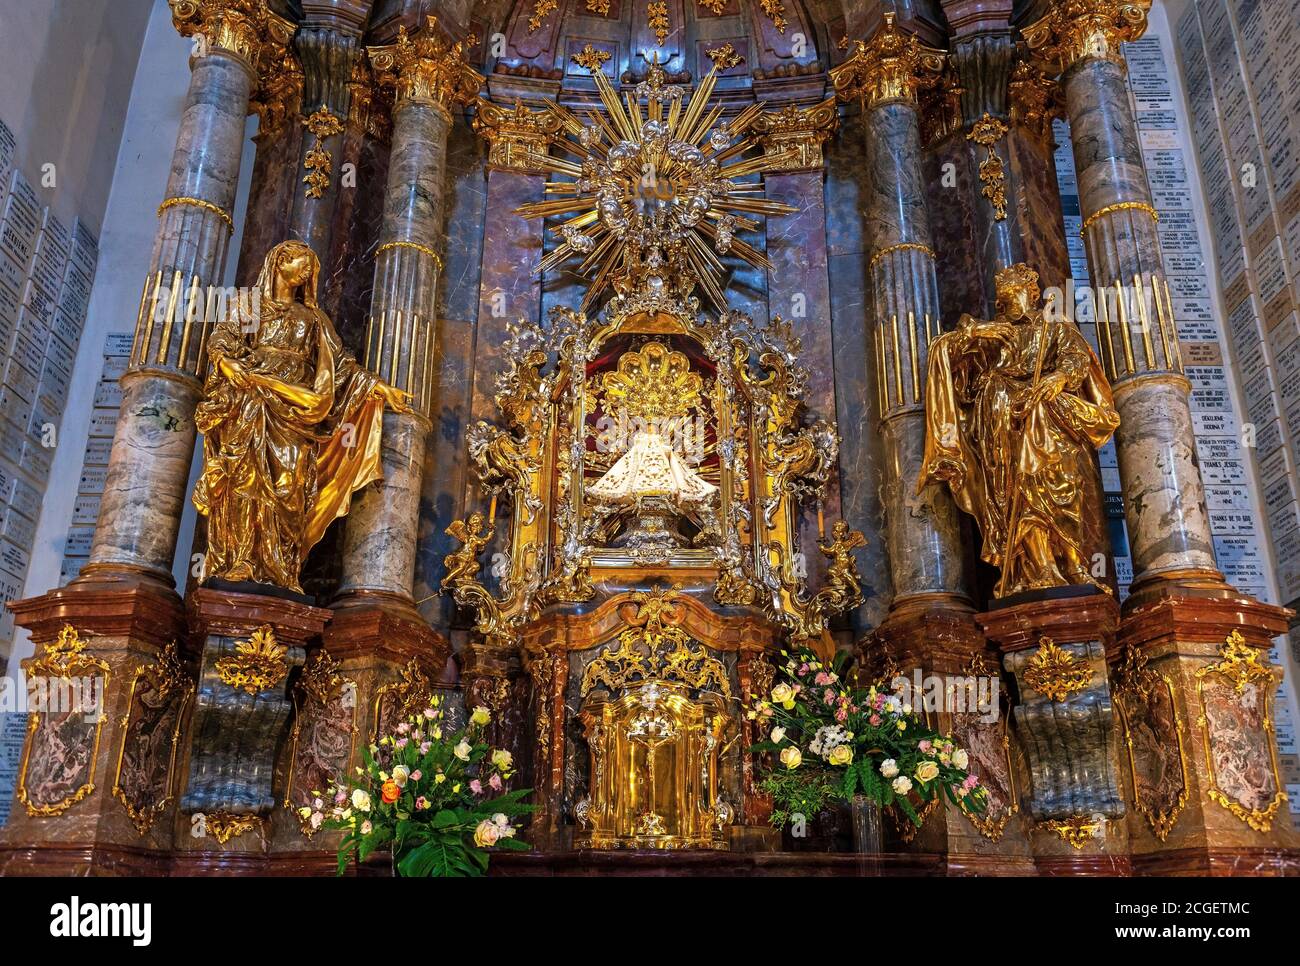 Church of Our Lady Victorious with the Shrine of the Infant Jesus of Prague, the first station on the Apostolic Road in the Czech Republic, Prague. Stock Photo